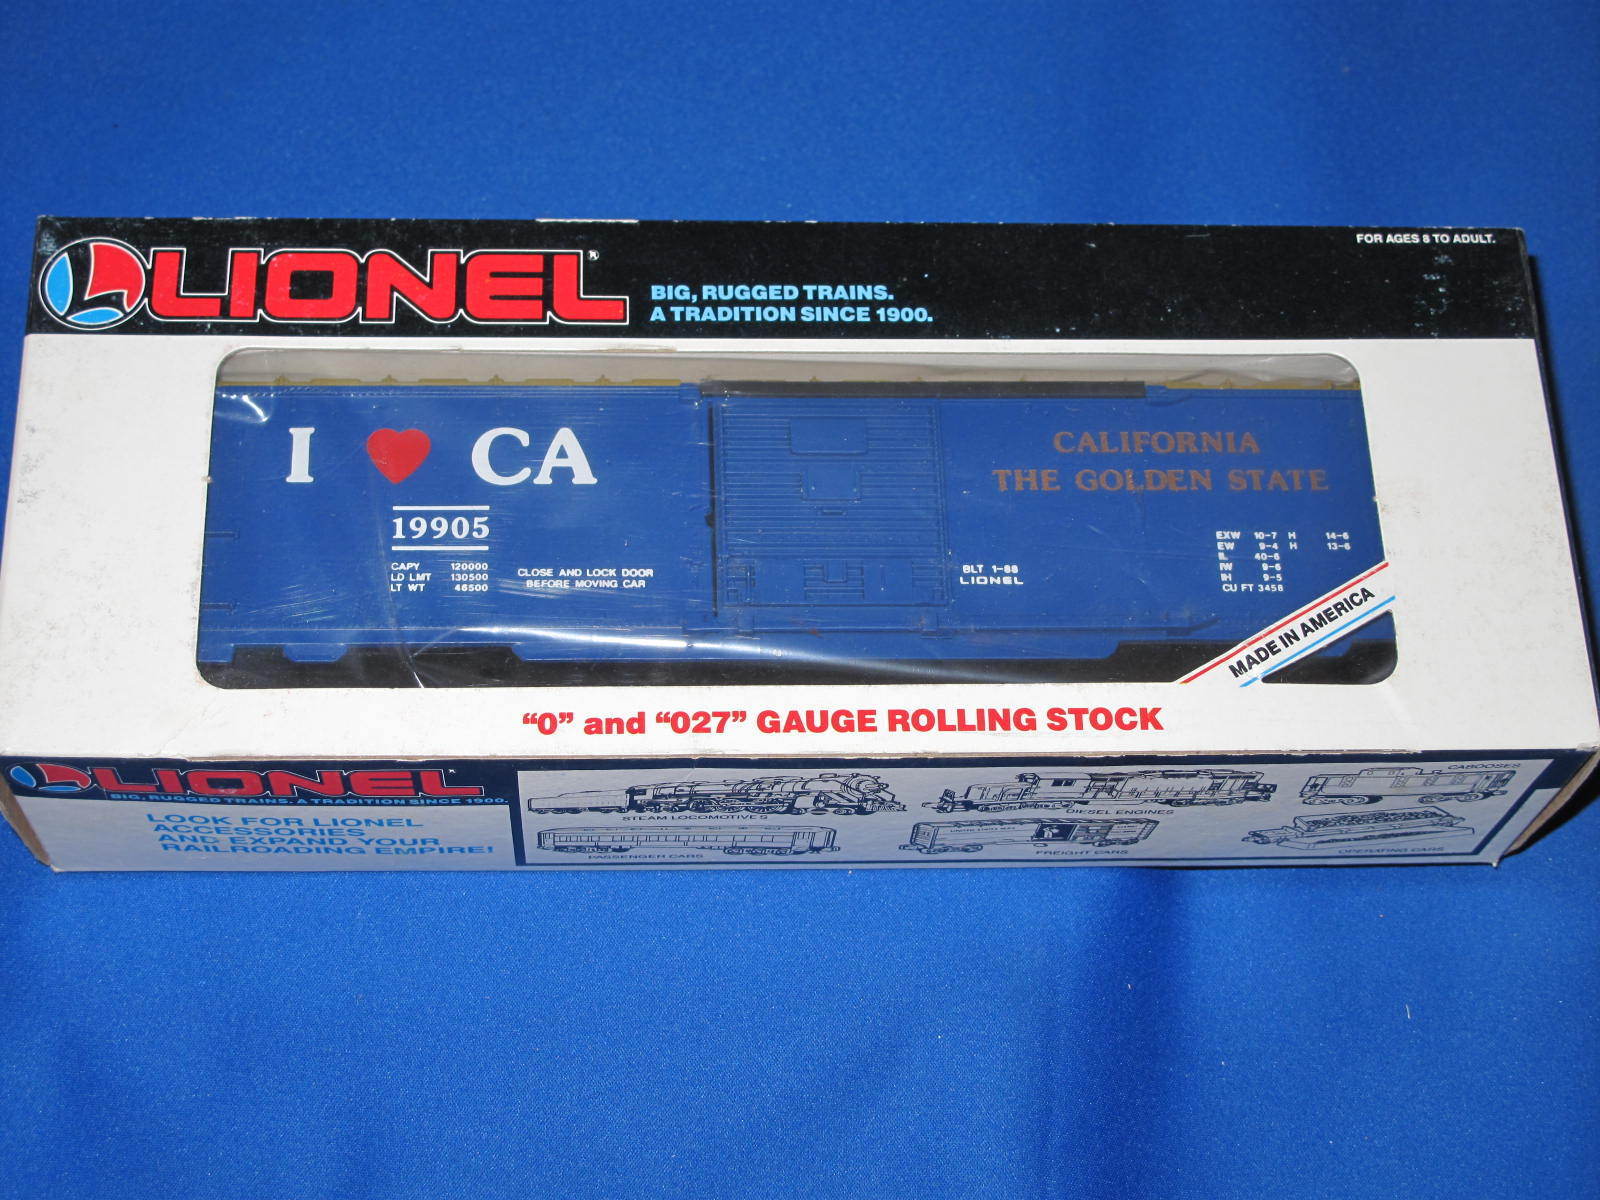 Lionel 19905 I Love California Boxcar 1988 MINT C10 for sale online